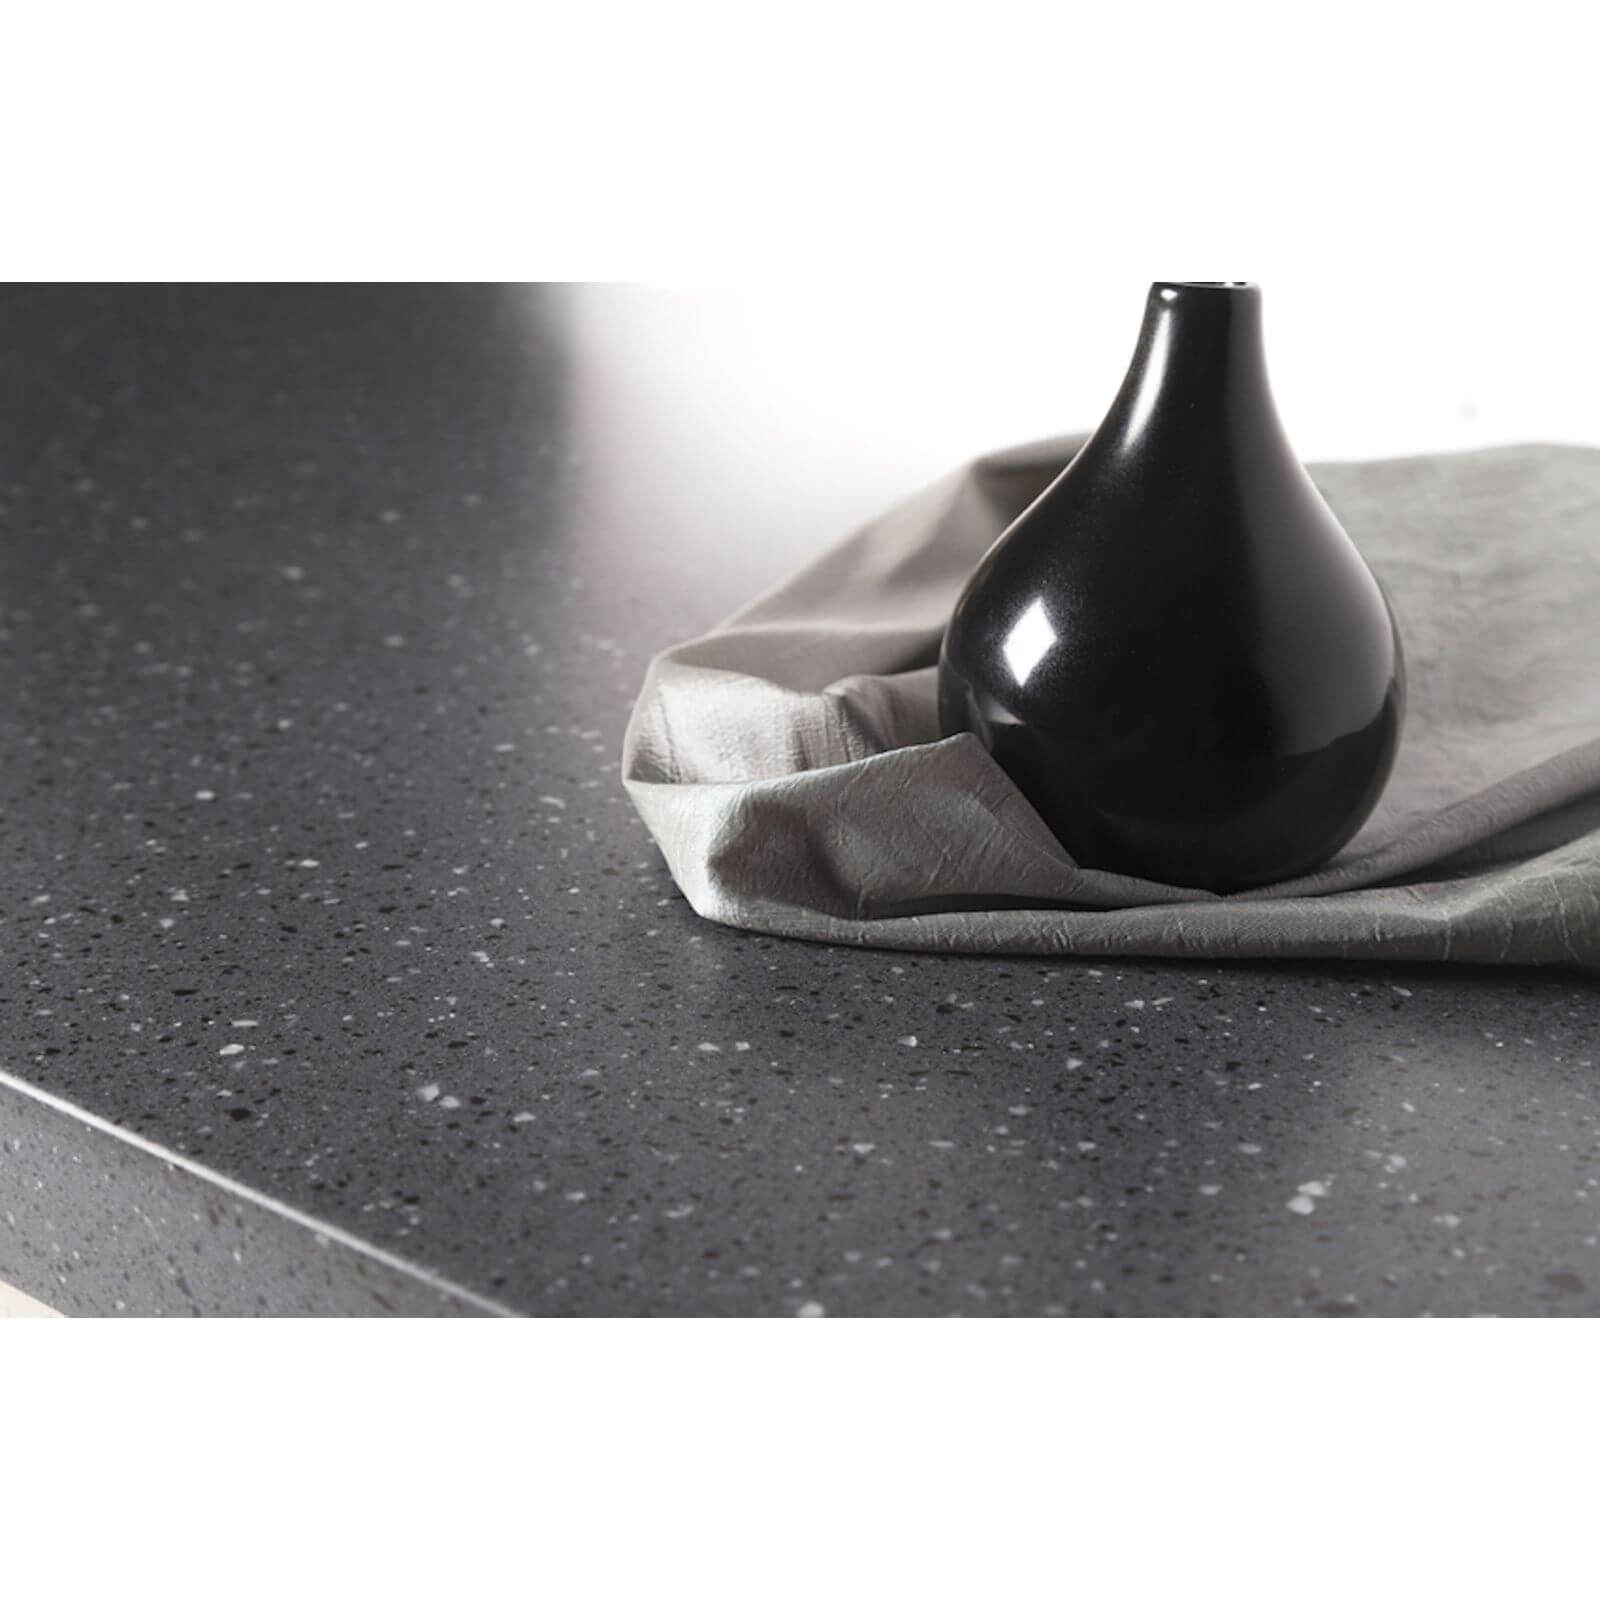 Maia Greystone Kitchen Sink Worktop - Acrylic Super Large Right Hand Bowl - 1800 x 650 x 28mm